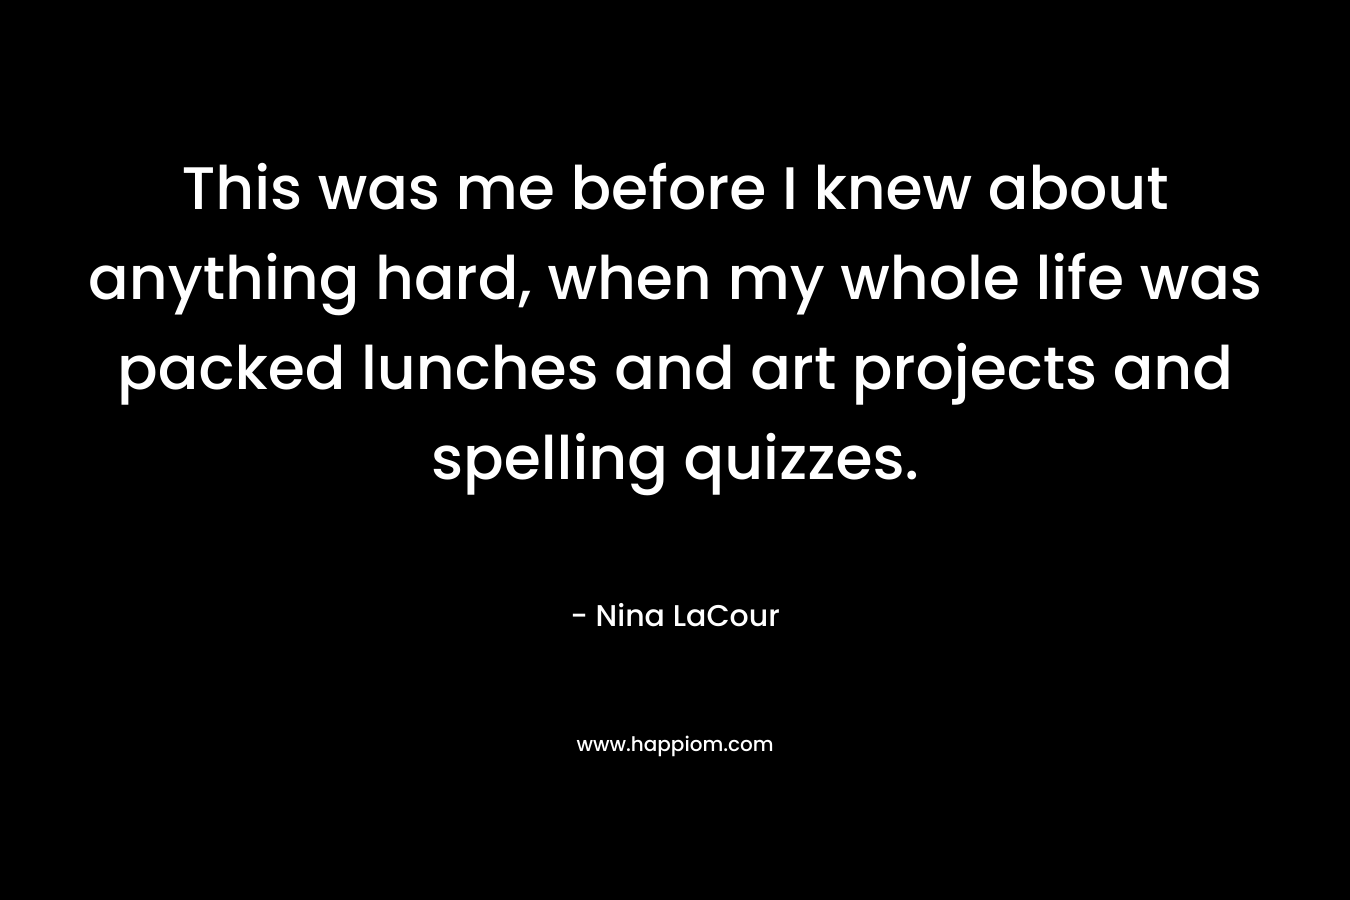 This was me before I knew about anything hard, when my whole life was packed lunches and art projects and spelling quizzes. – Nina LaCour